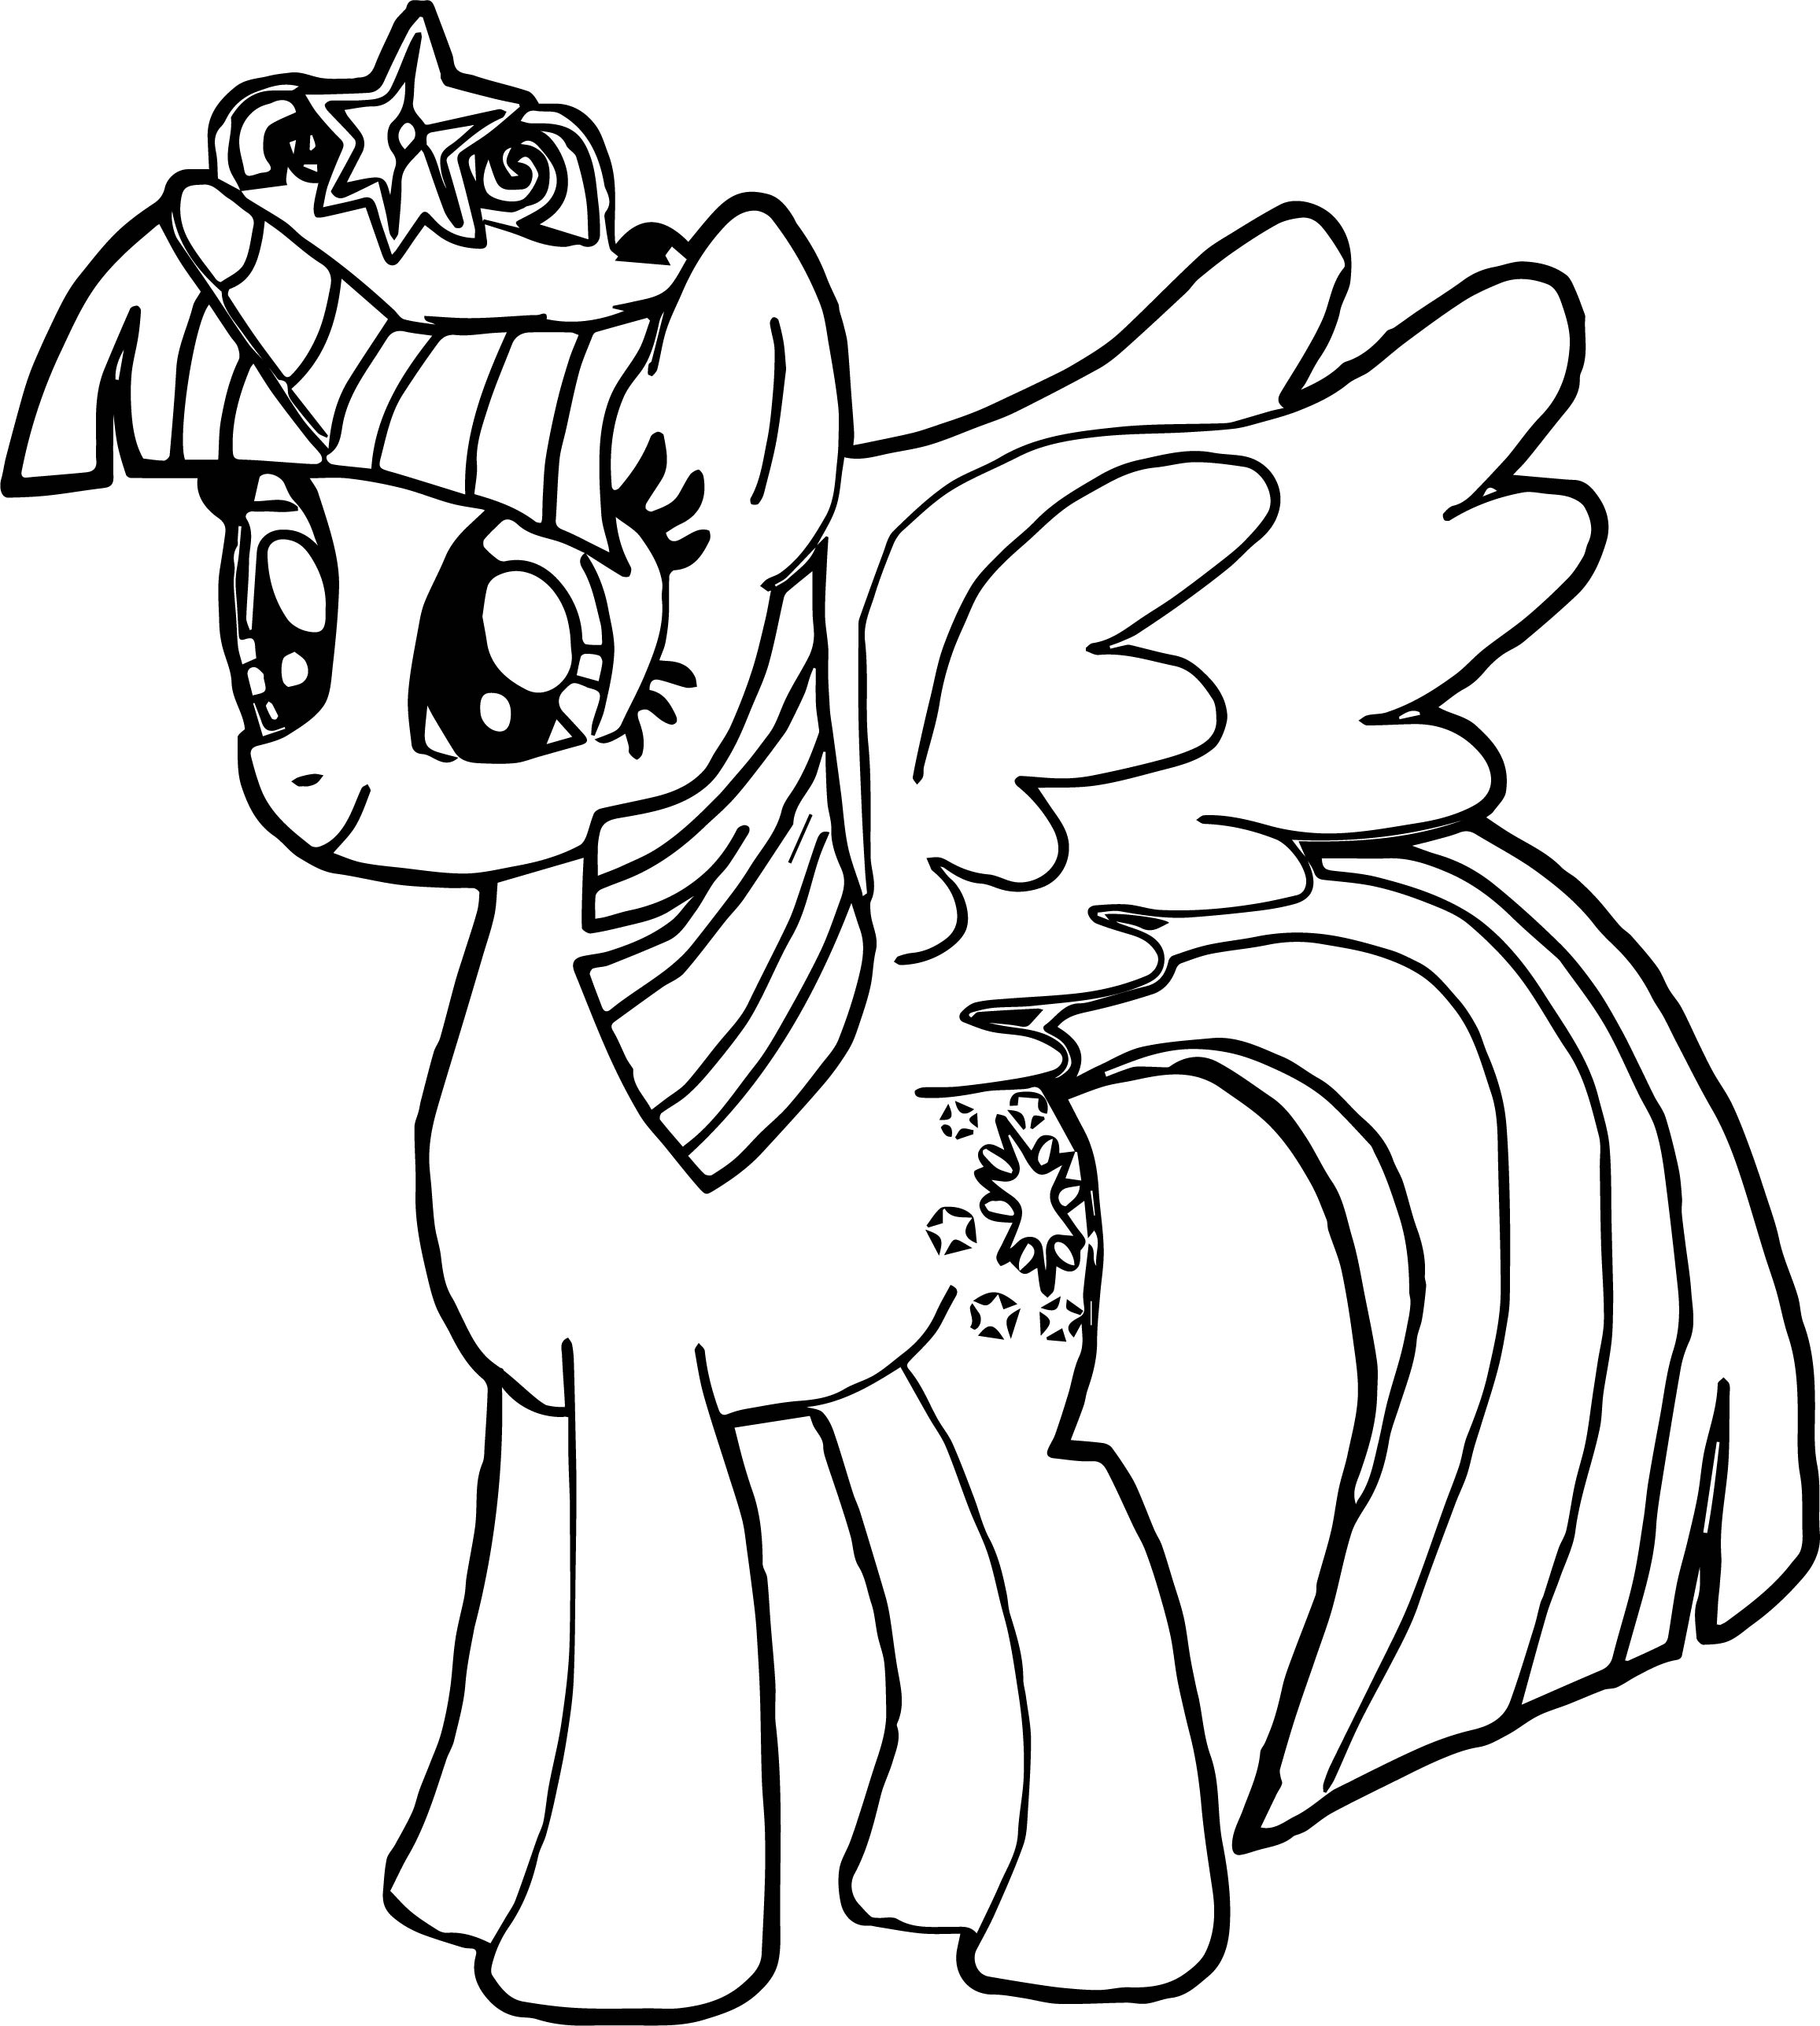 princess-twilight-sparkle-drawing-free-download-on-clipartmag